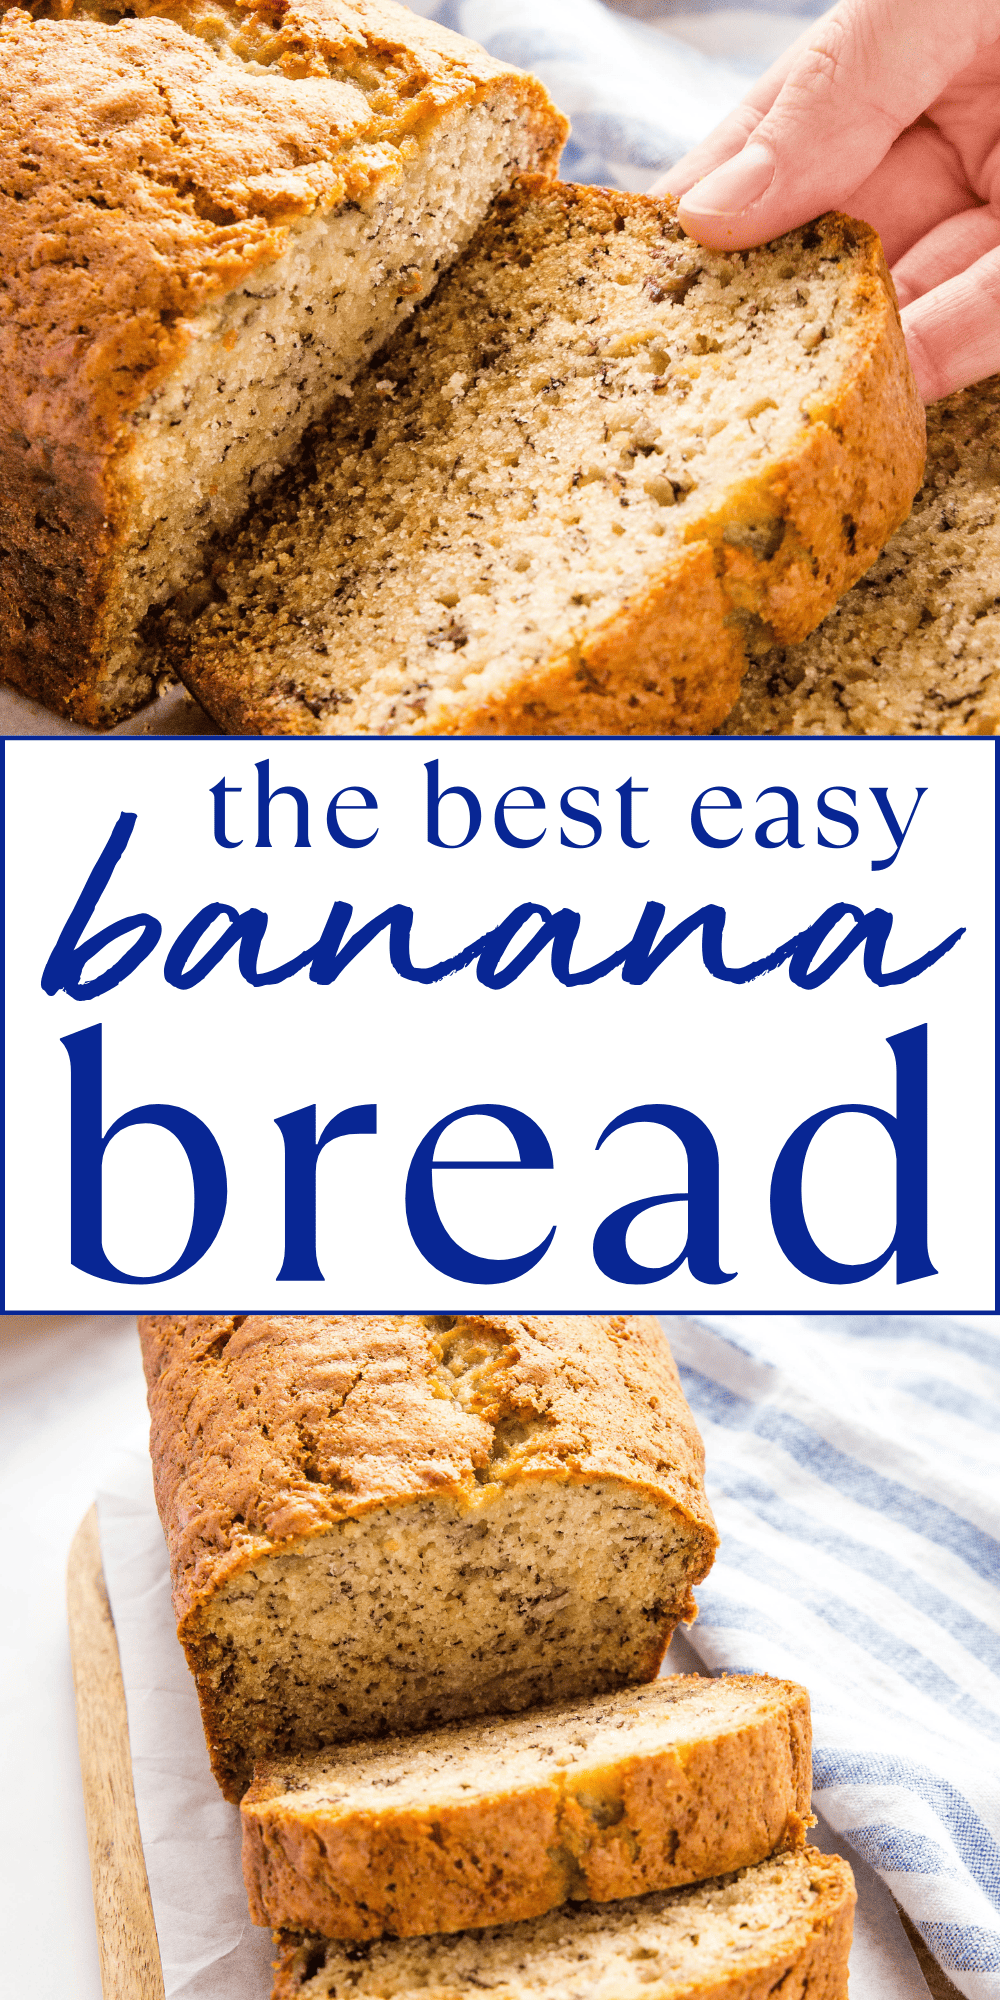 This Best Banana Bread recipe is the ultimate homemade banana bread - ultra moist, soft and tender, and made with ripe bananas. Super easy to make with pro tips and tricks for the best ever banana bread! Recipe from thebusybaker.ca! #bananabread #easybananabread #bestbananabread #bananabreadrecipe #homebaking #bakingrecipe #baking #bananaloaf #howtomakebananabread via @busybakerblog